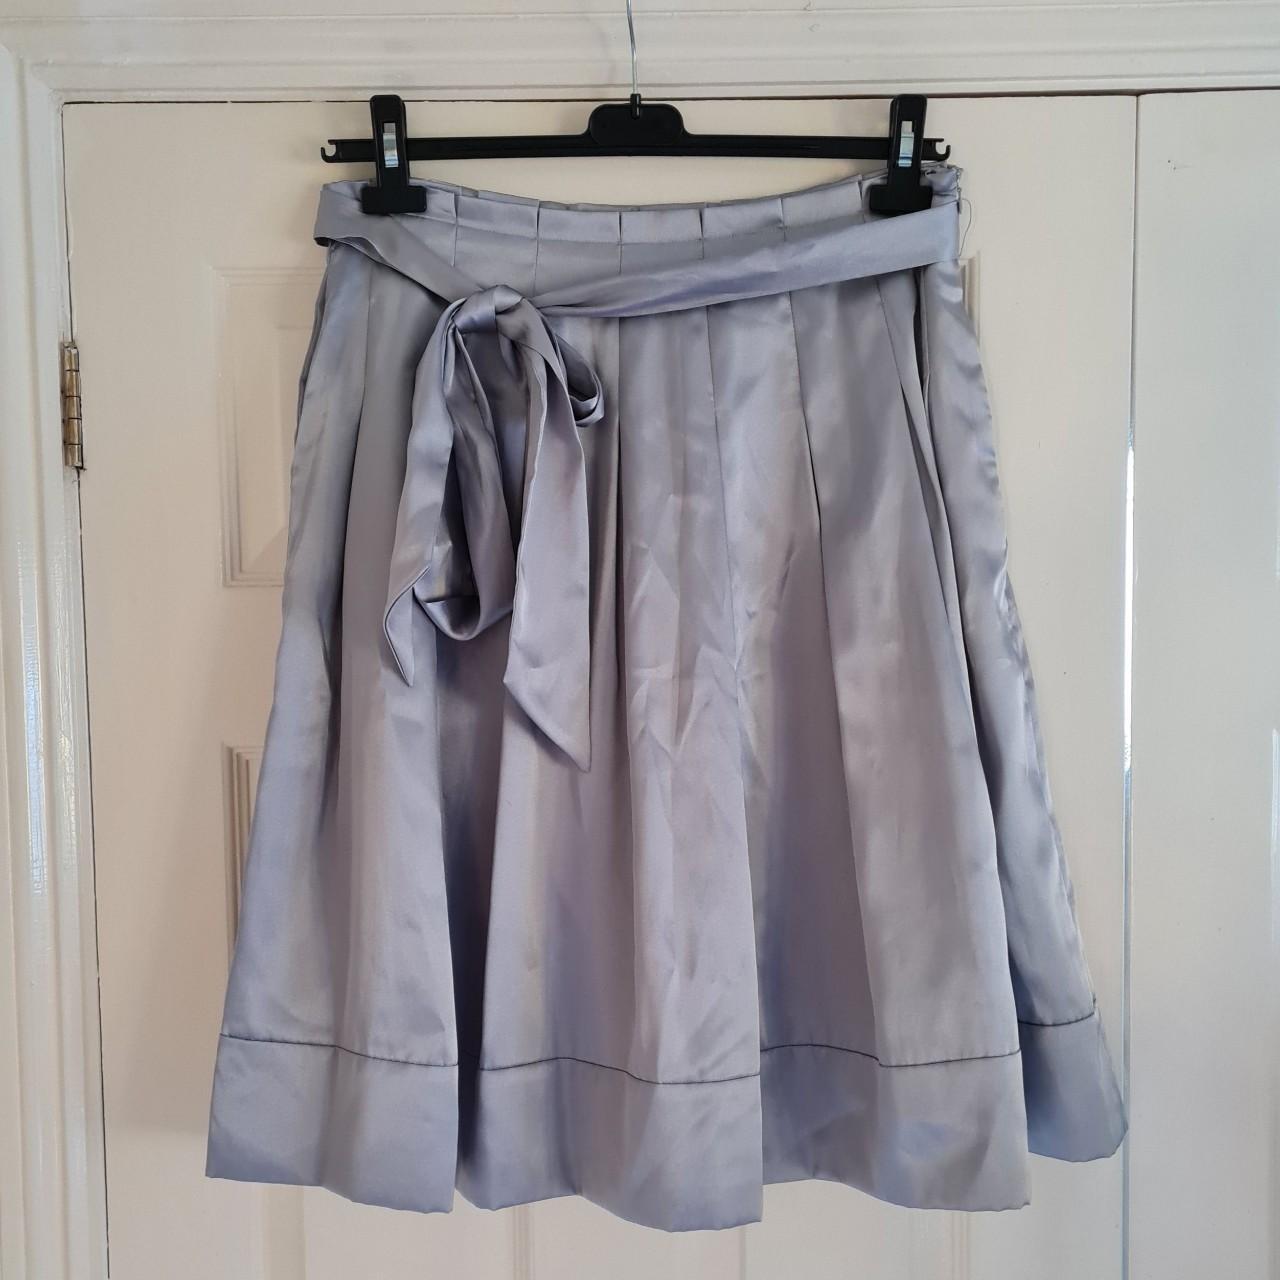 Silver/grey pleated skirt with fabric belt. Size 14 - Depop